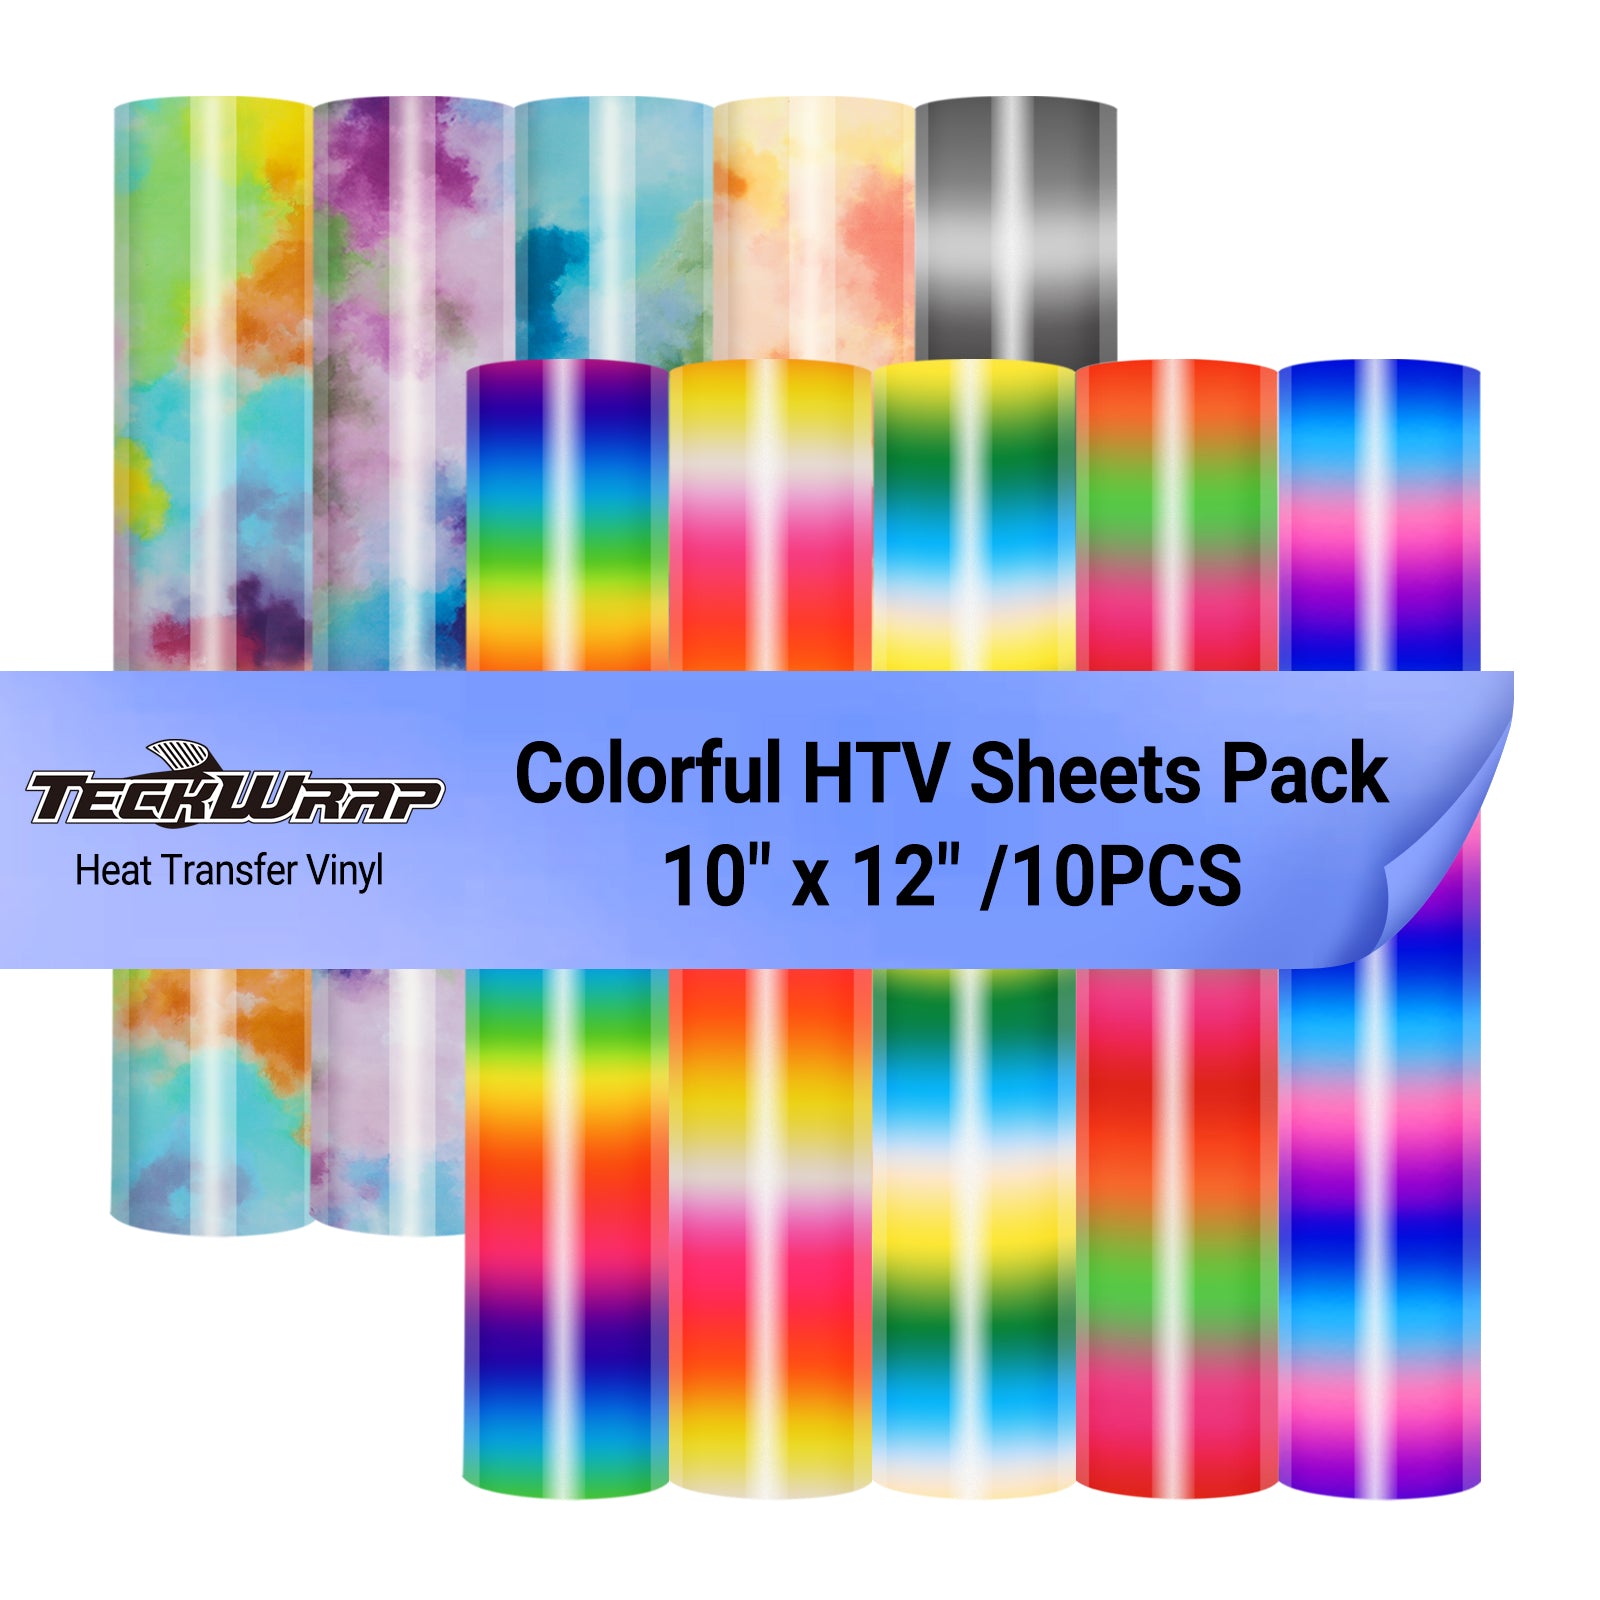 Colorful HTV Sheets Pack